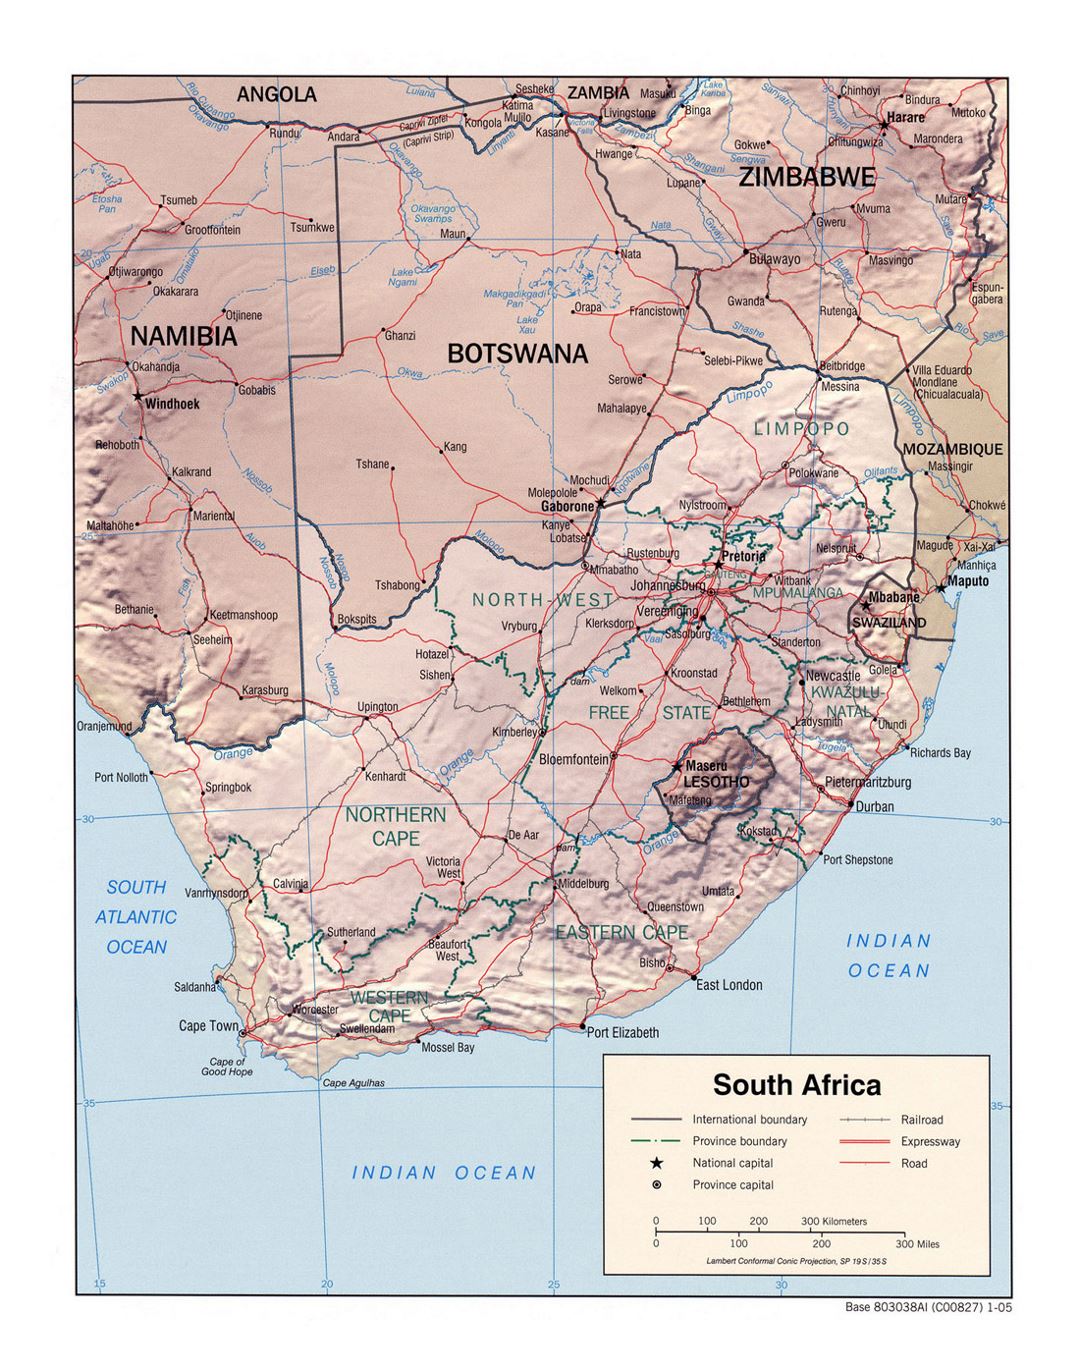 Detailed political and administrative map of South Africa with relief, roads, railroads and major cities - 2005